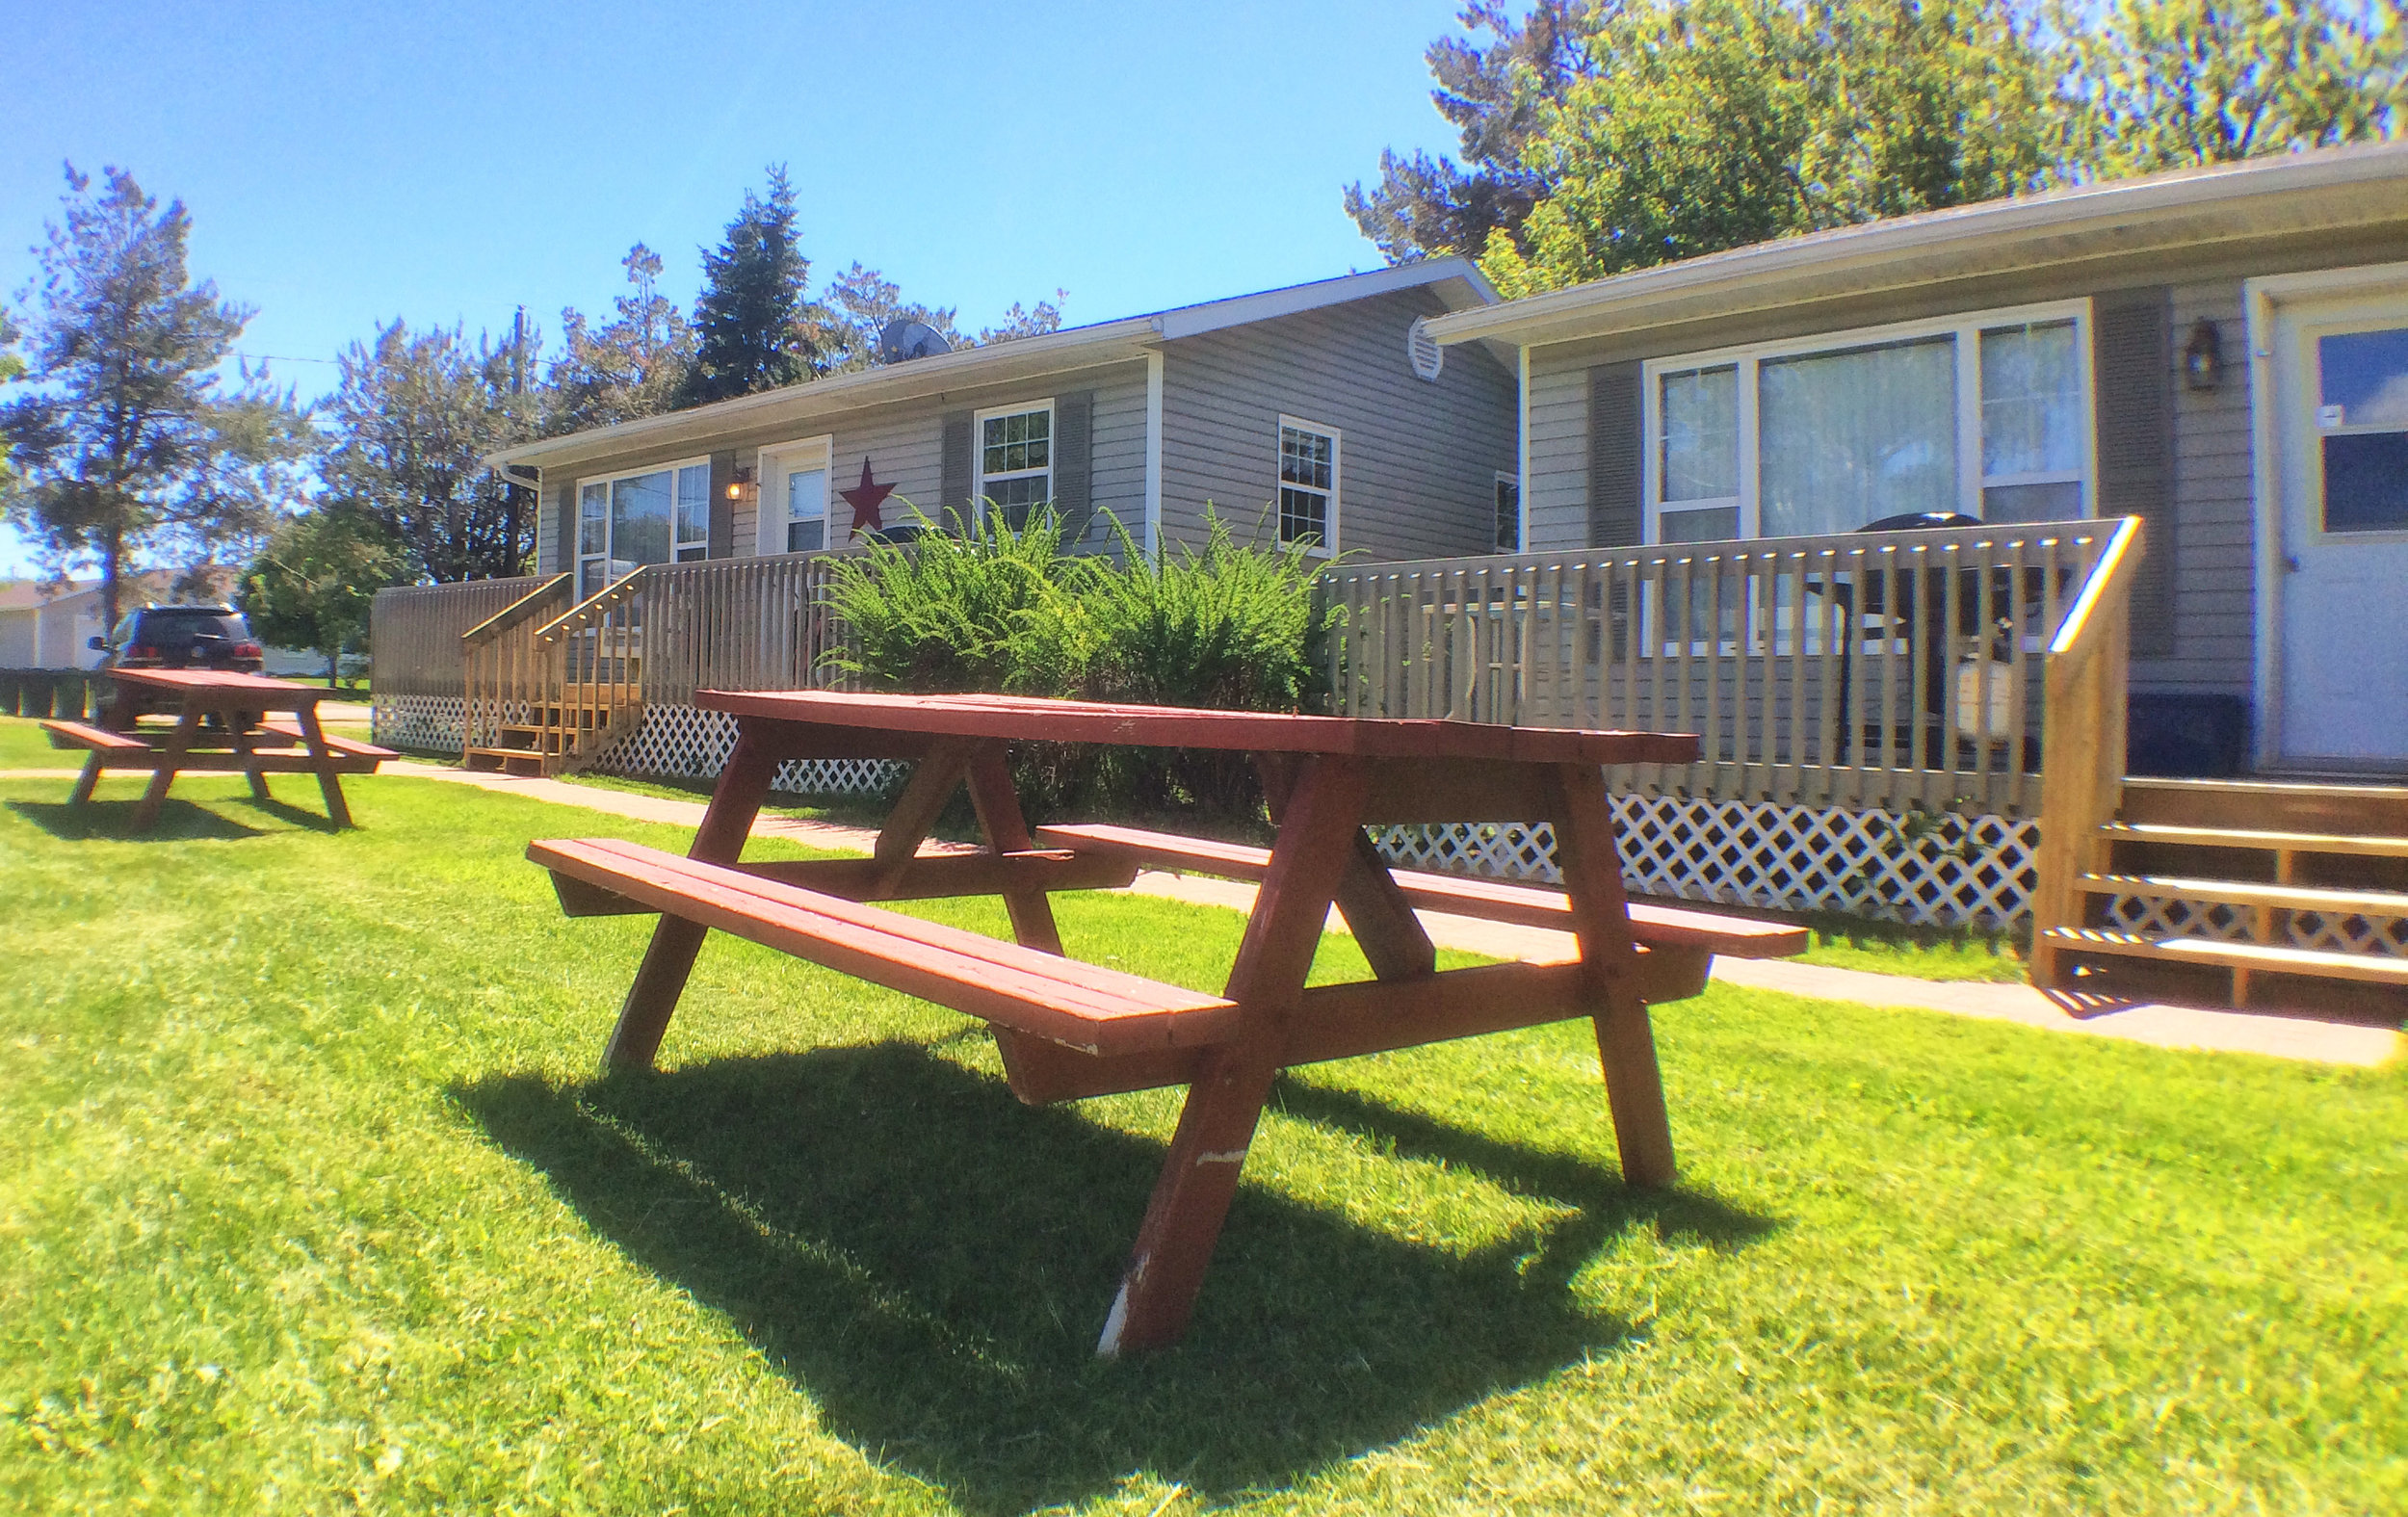 Picnic tables in front of cottages